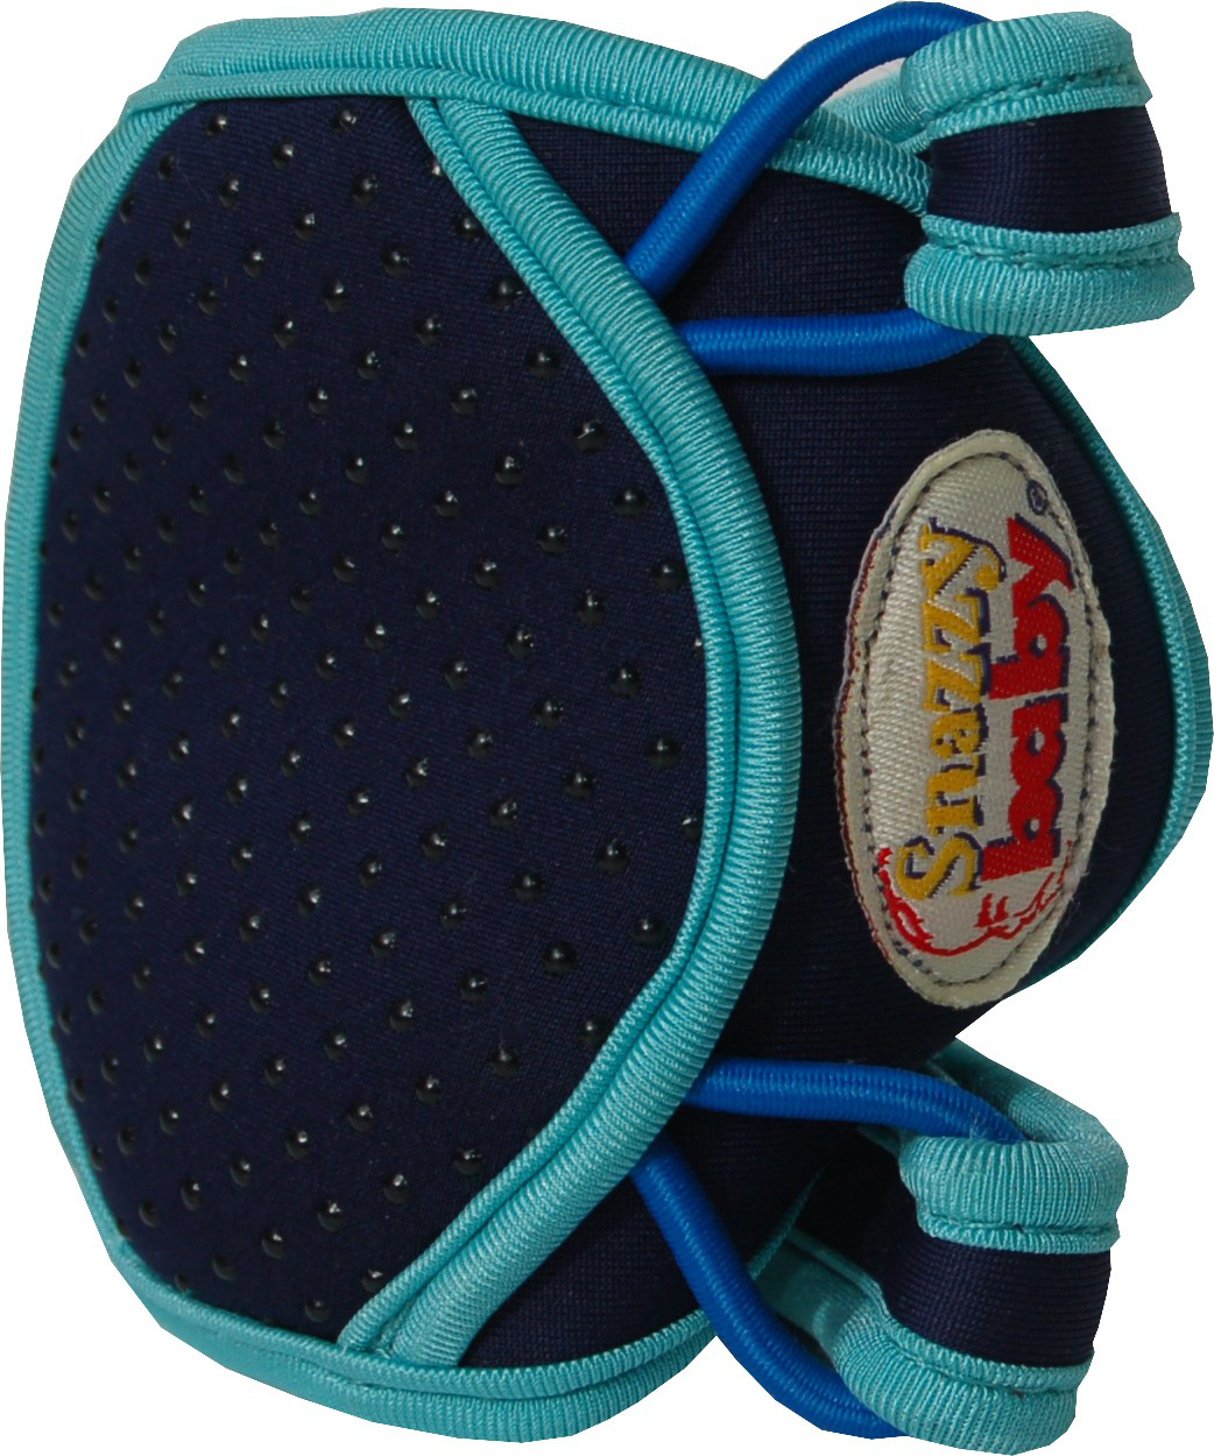 Top 9 Best Baby Knee Pads for Crawling Reviews in 2022 4